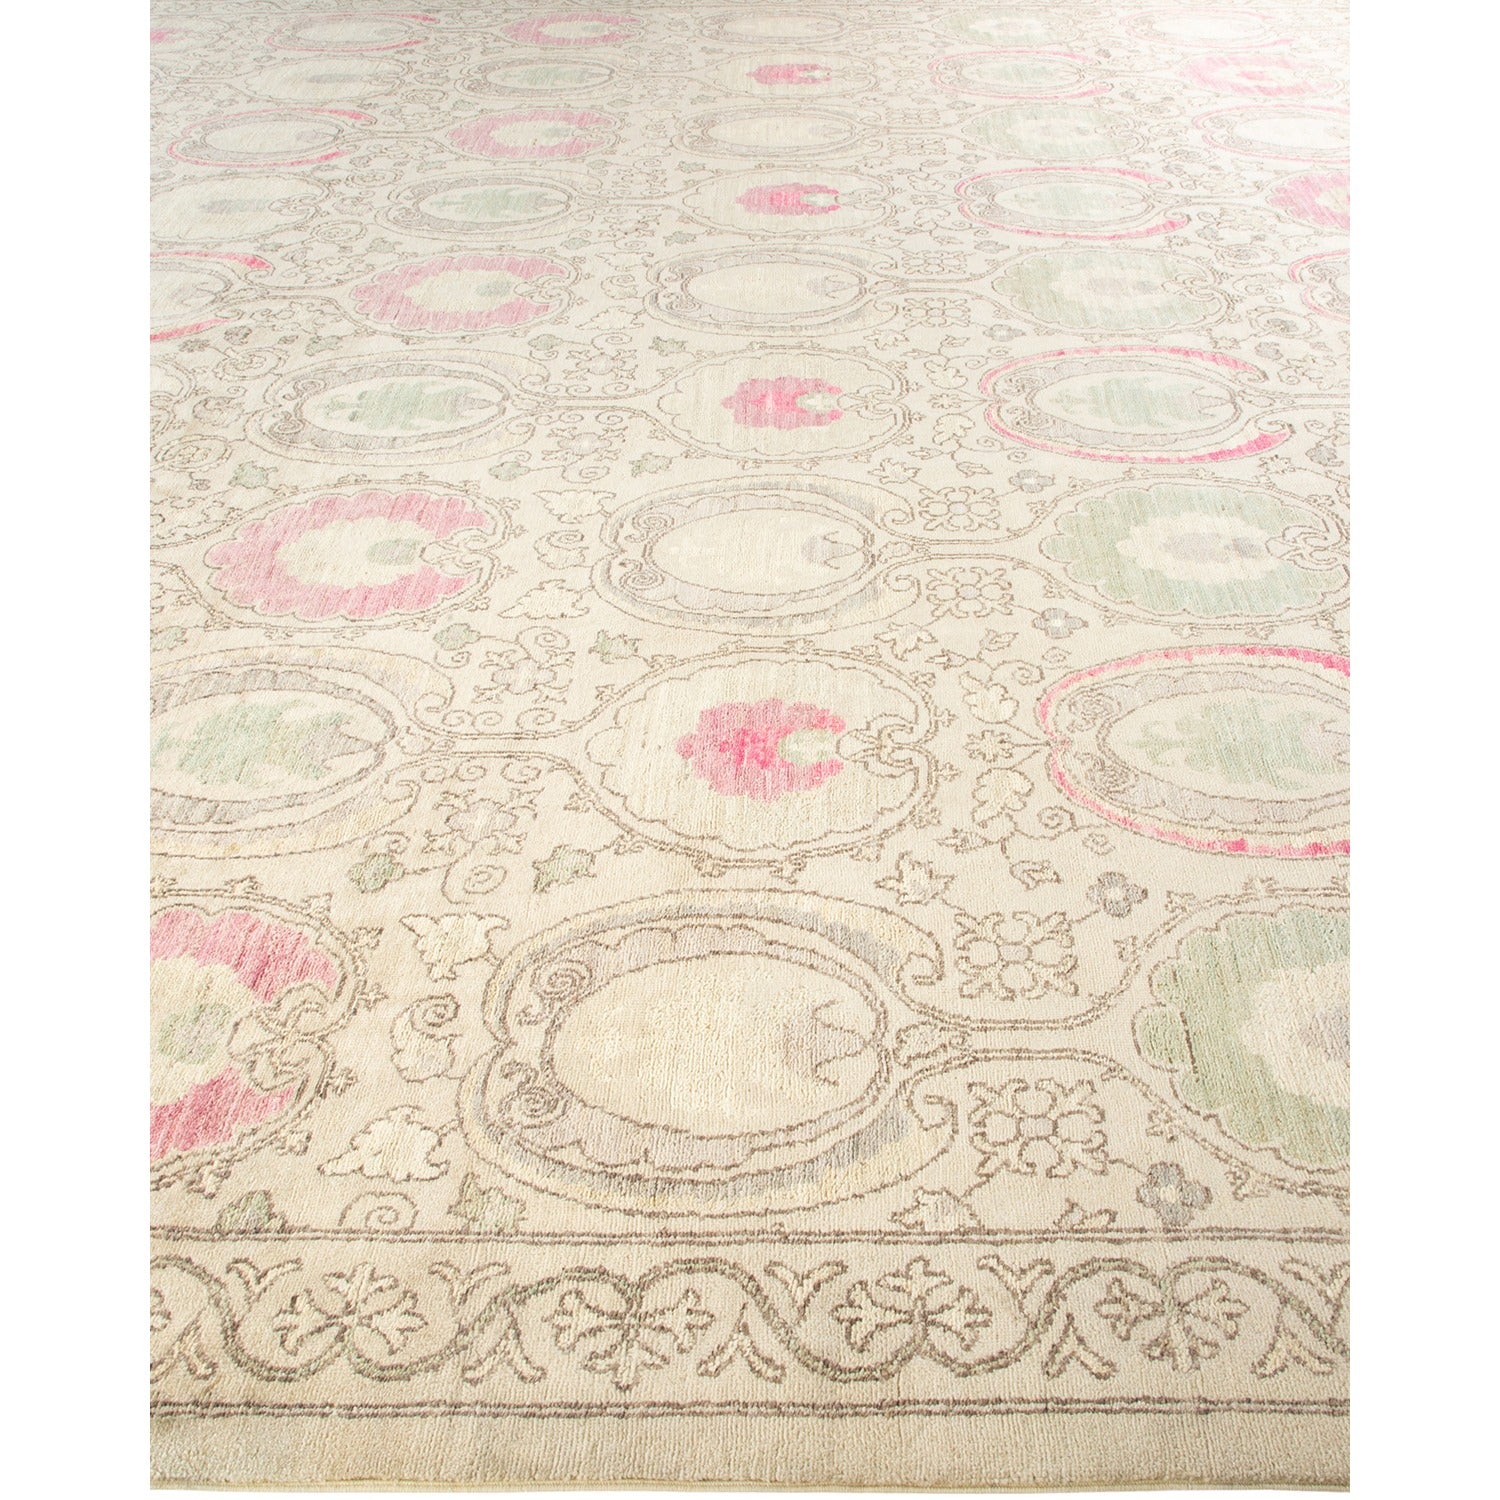 Large area rug with circular medallion pattern in vintage style